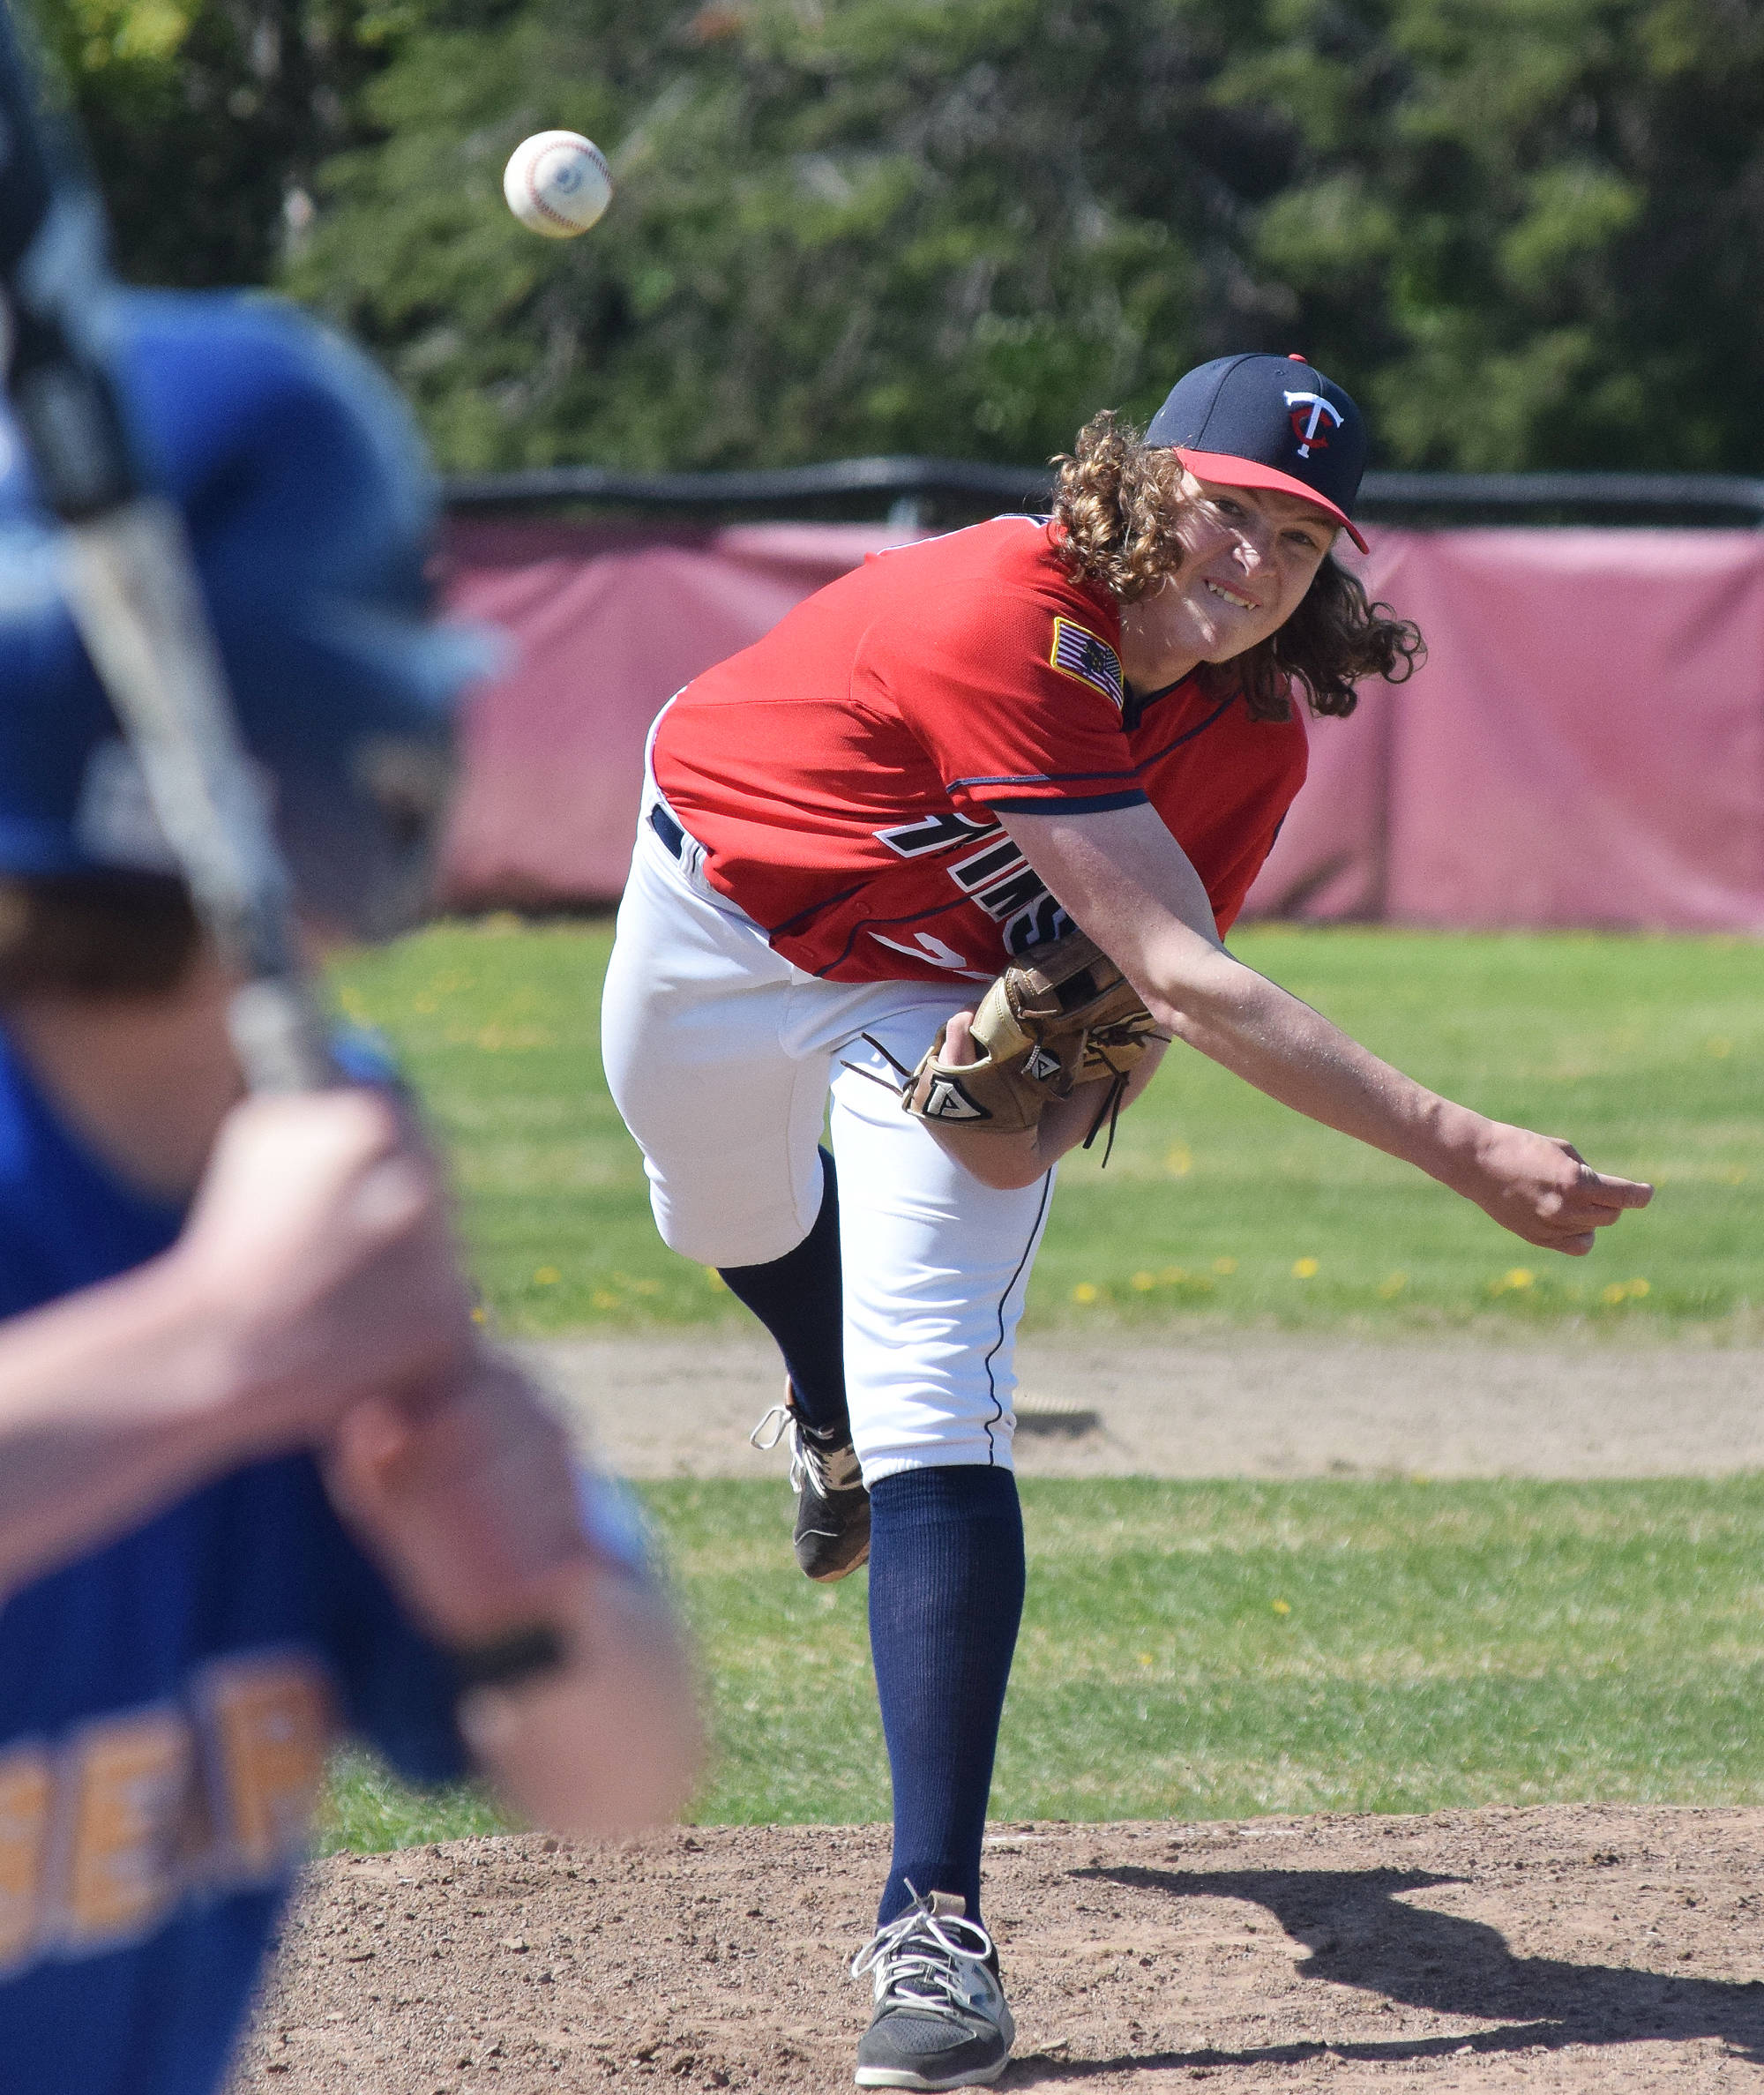 Legion Twins starter Logan Smith offers up a pitch to a Bartlett Bears batter Thursday afternoon at the Kenai Little League fields. (Photo by Joey Klecka/Peninsula Clarion)